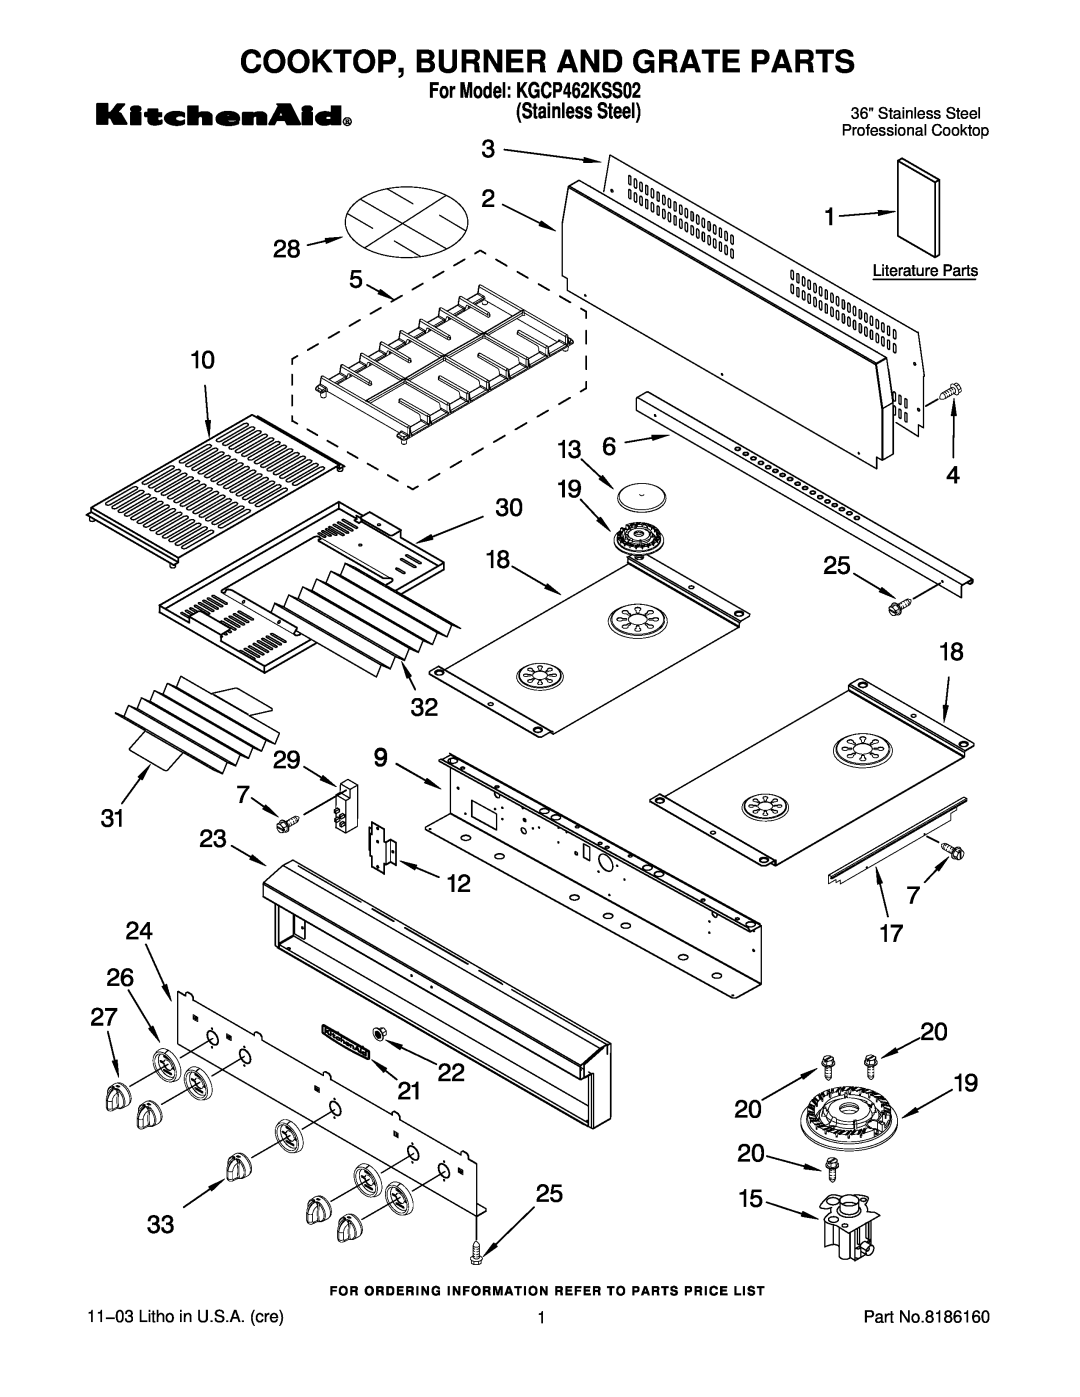 KitchenAid KGCP462KSS02 manual Cooktop, Burner And Grate Parts, 11−03 Litho in U.S.A. cre, Part No.8186160 